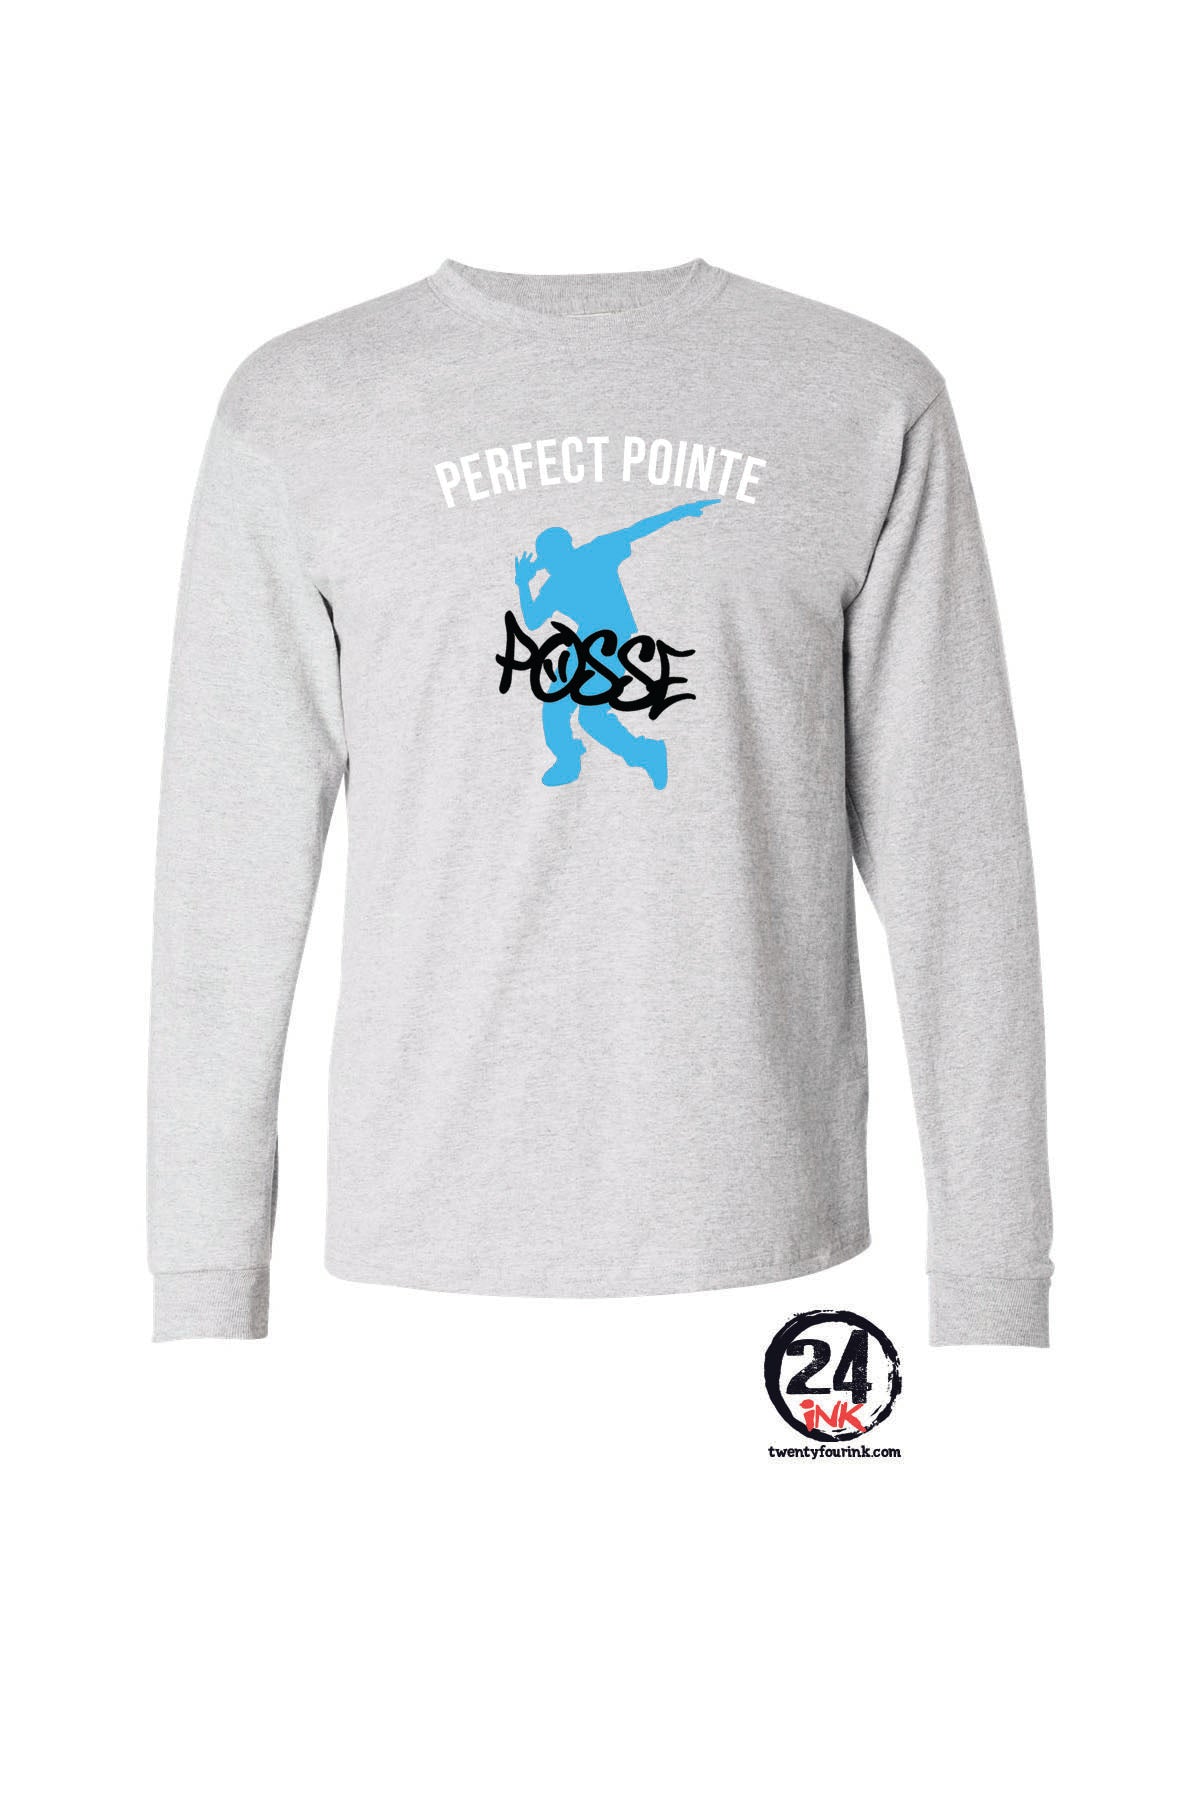 Perfect Pointe design 7 Long Sleeve